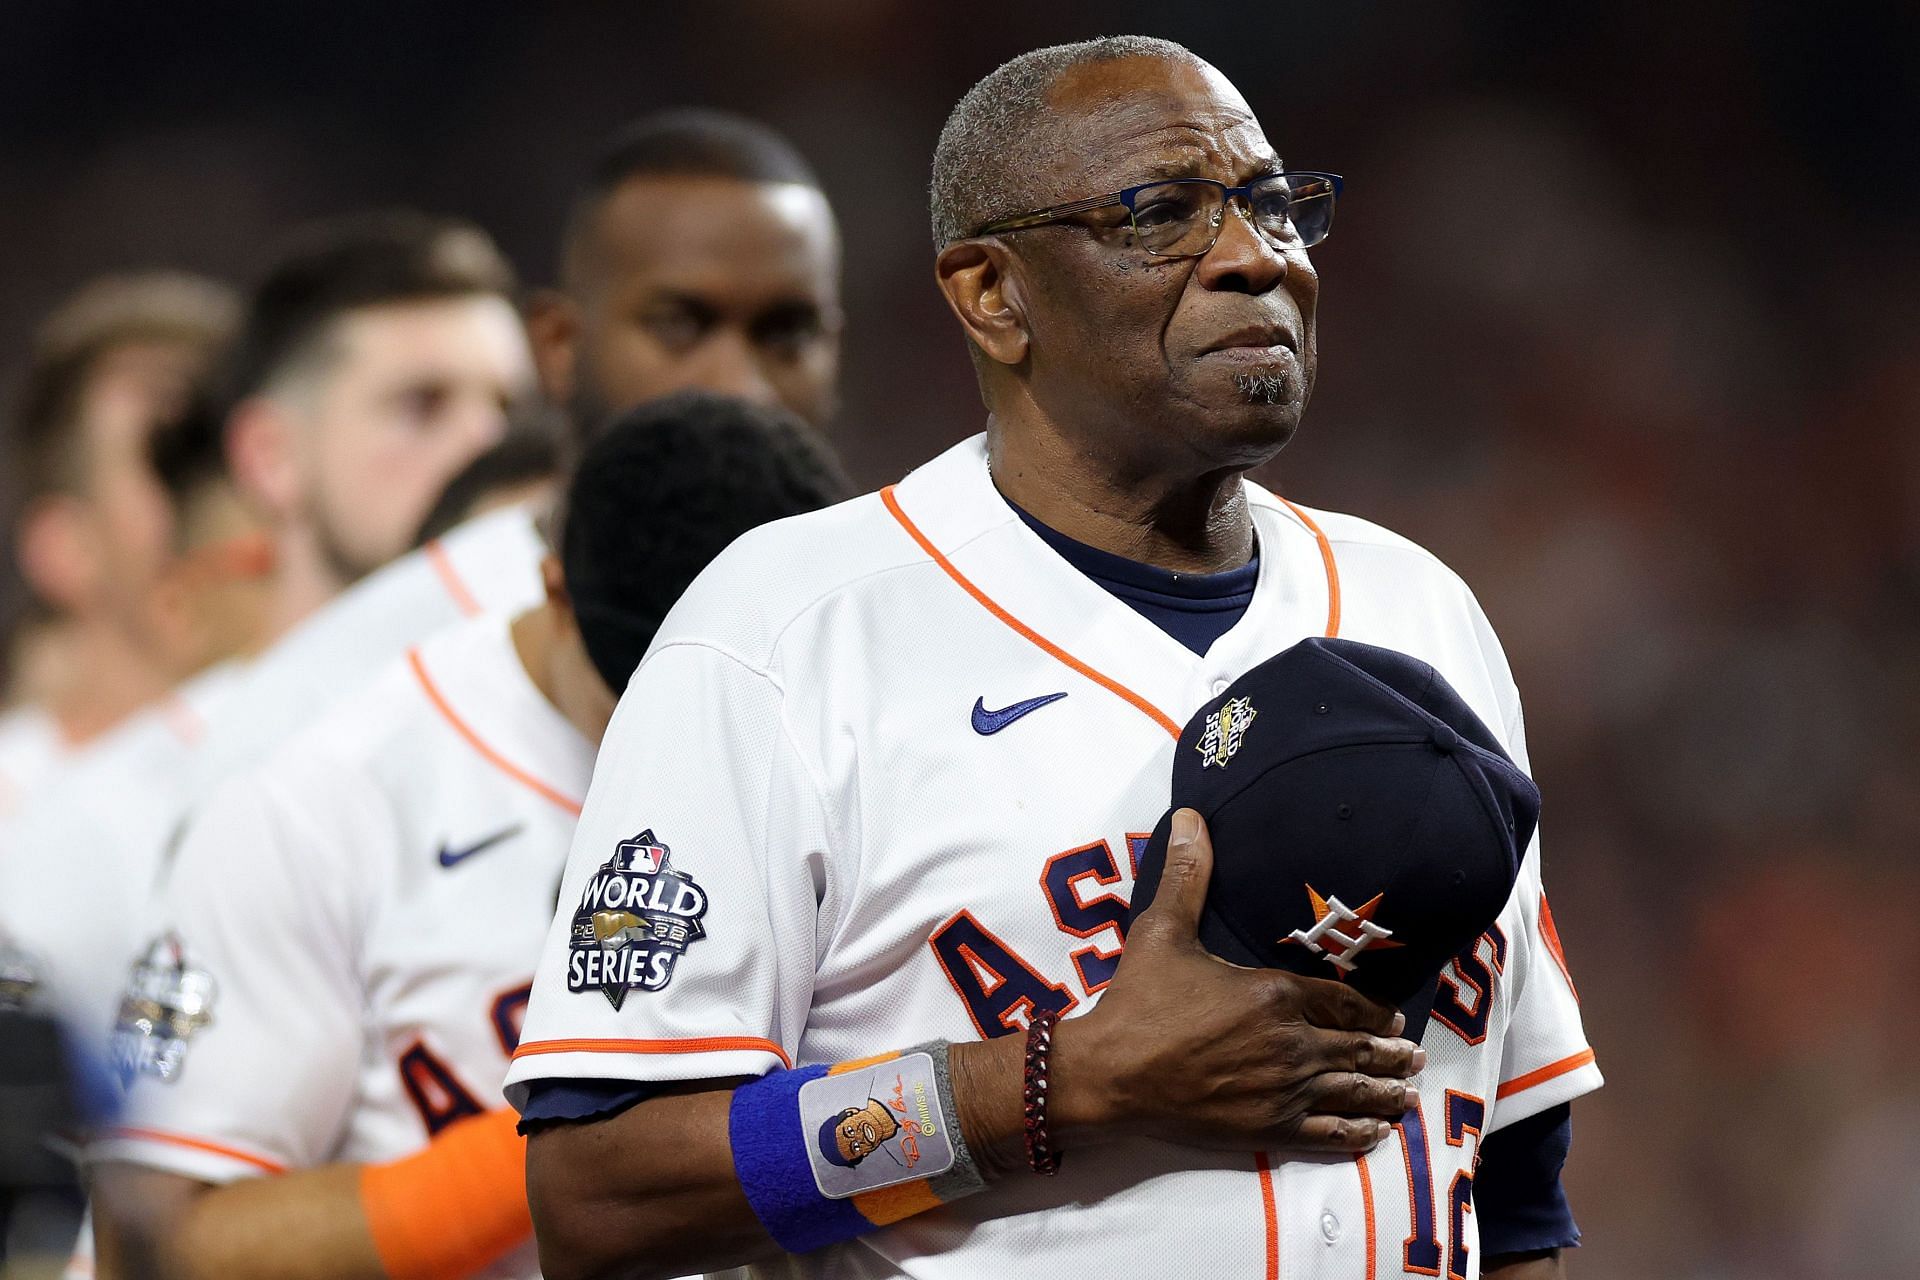 Dusty Baker is aiming to win his first-ever World Series title